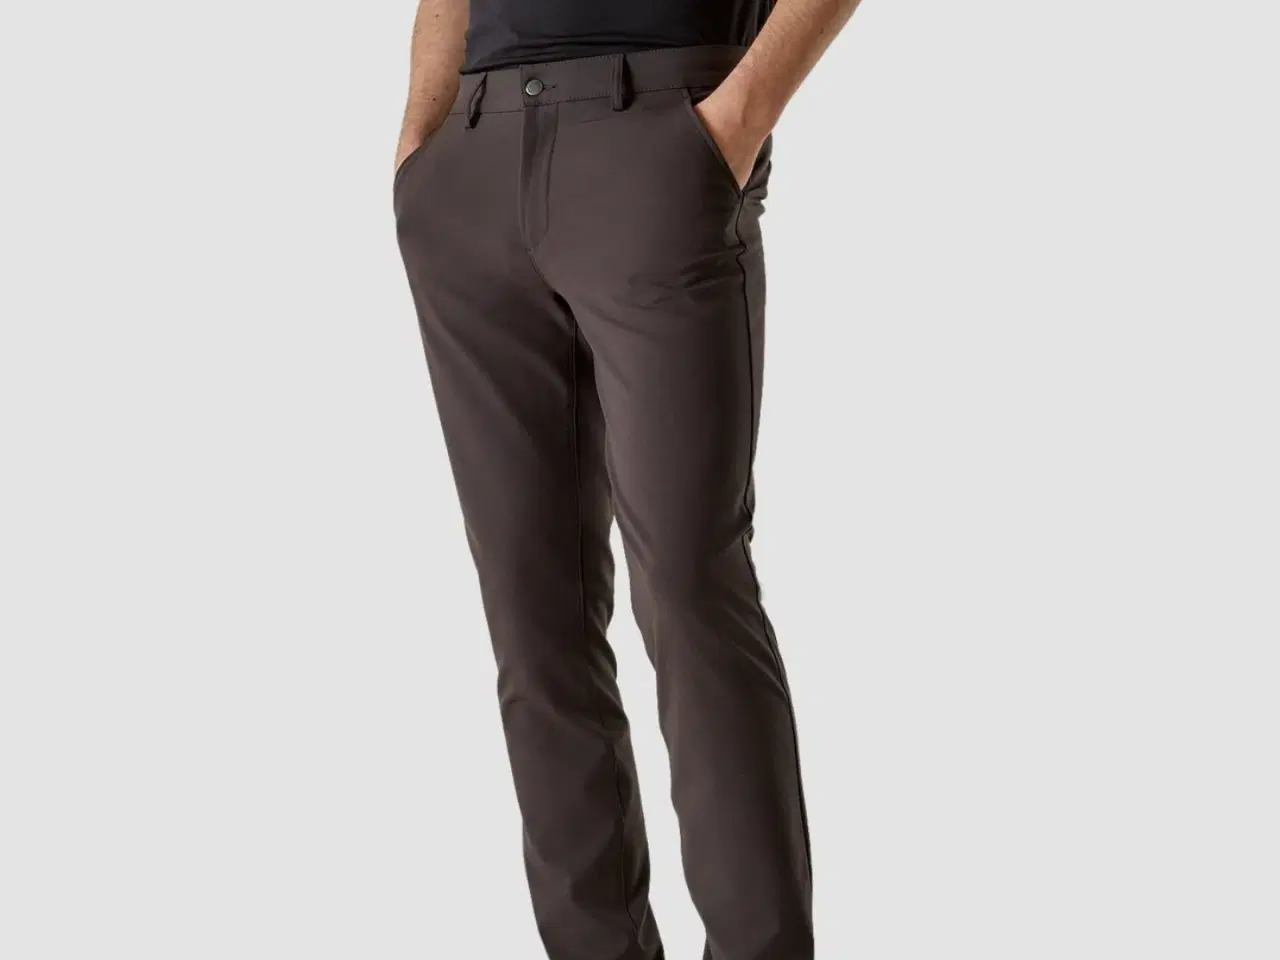 Billede 1 - Shaping new tomorrow - Essential pants 38/32